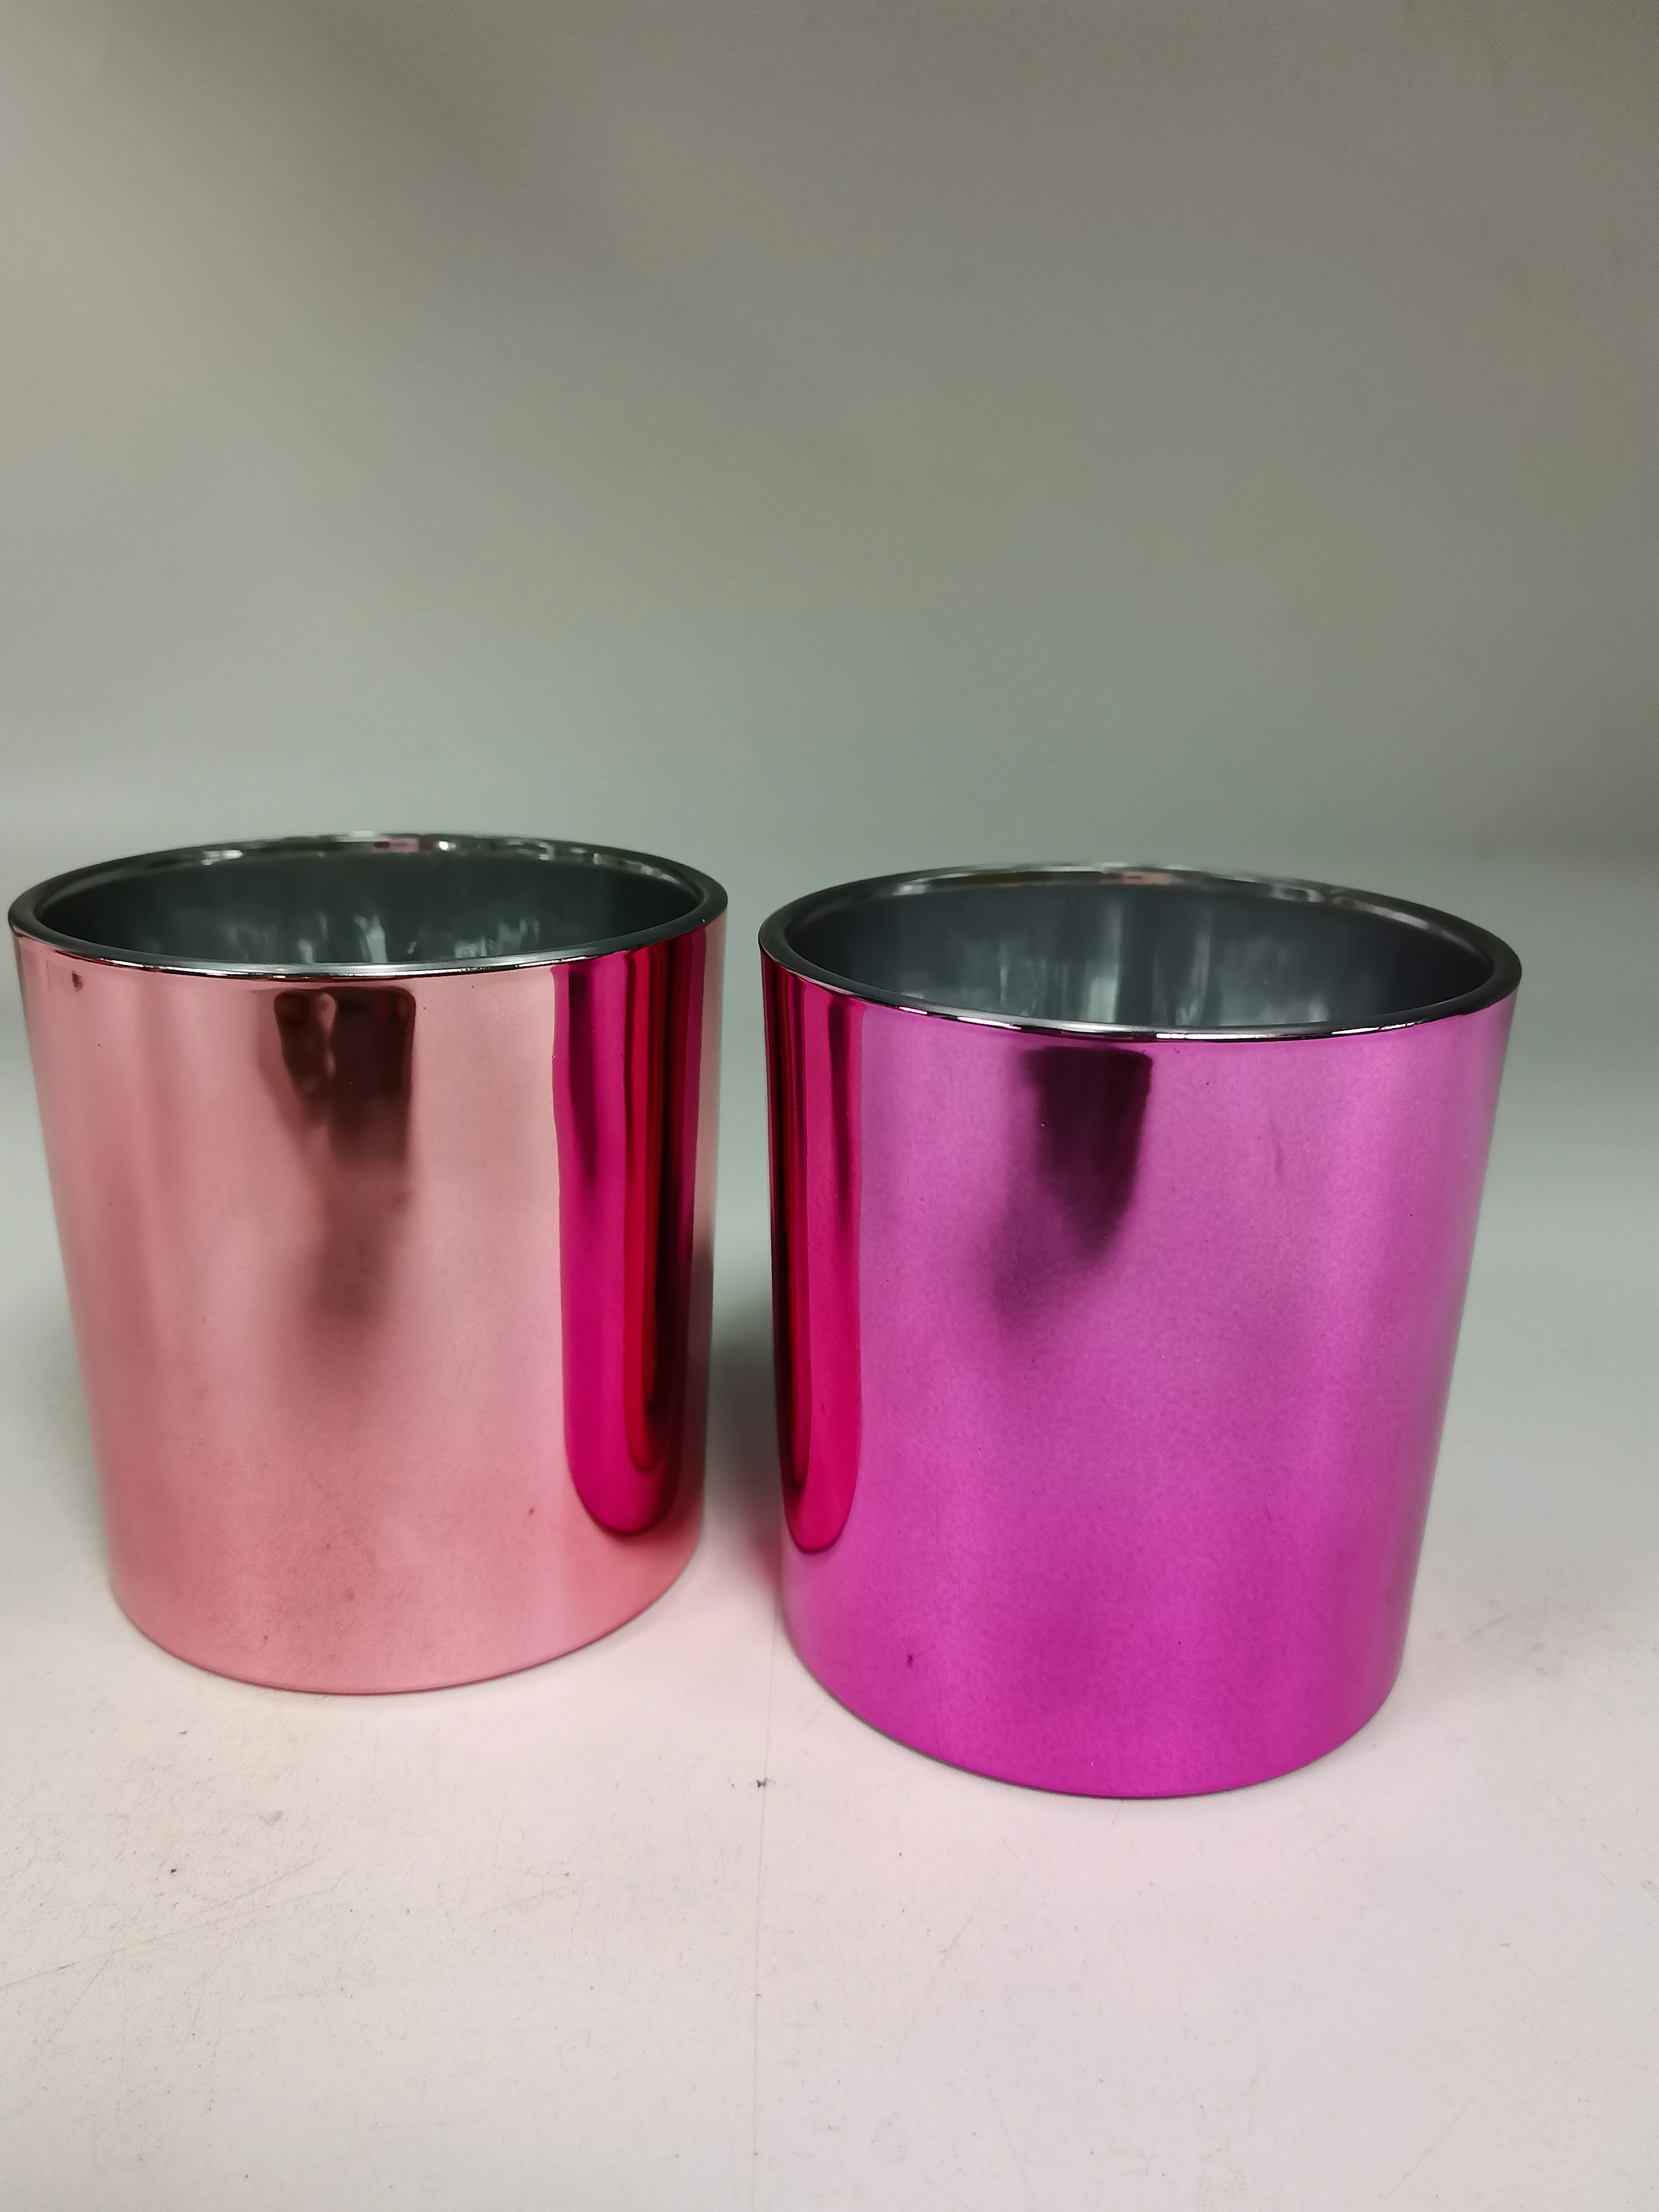 Hot sale customized electroplating  with water dopped effect of customized color on glass candle jars for supplier